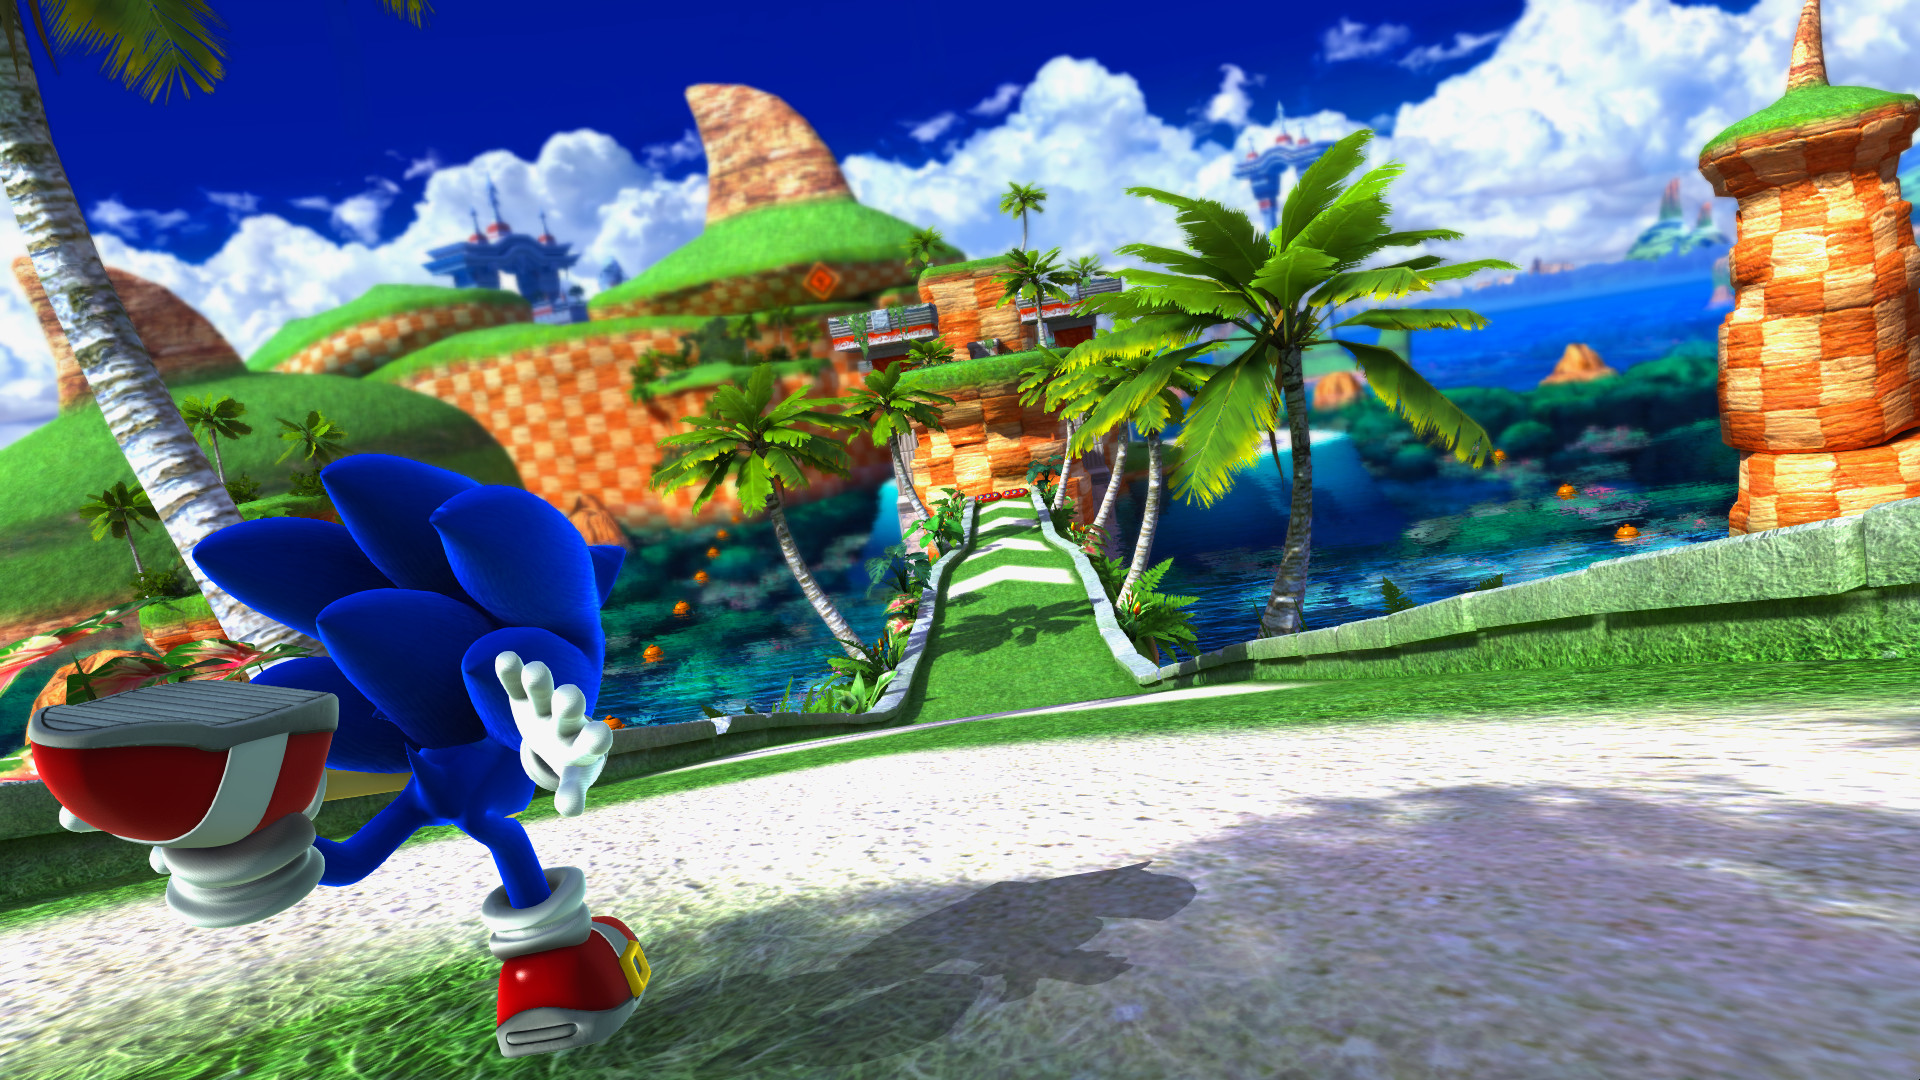 Sonic Generations: Redux on X: Bless your timeline with Pure SU